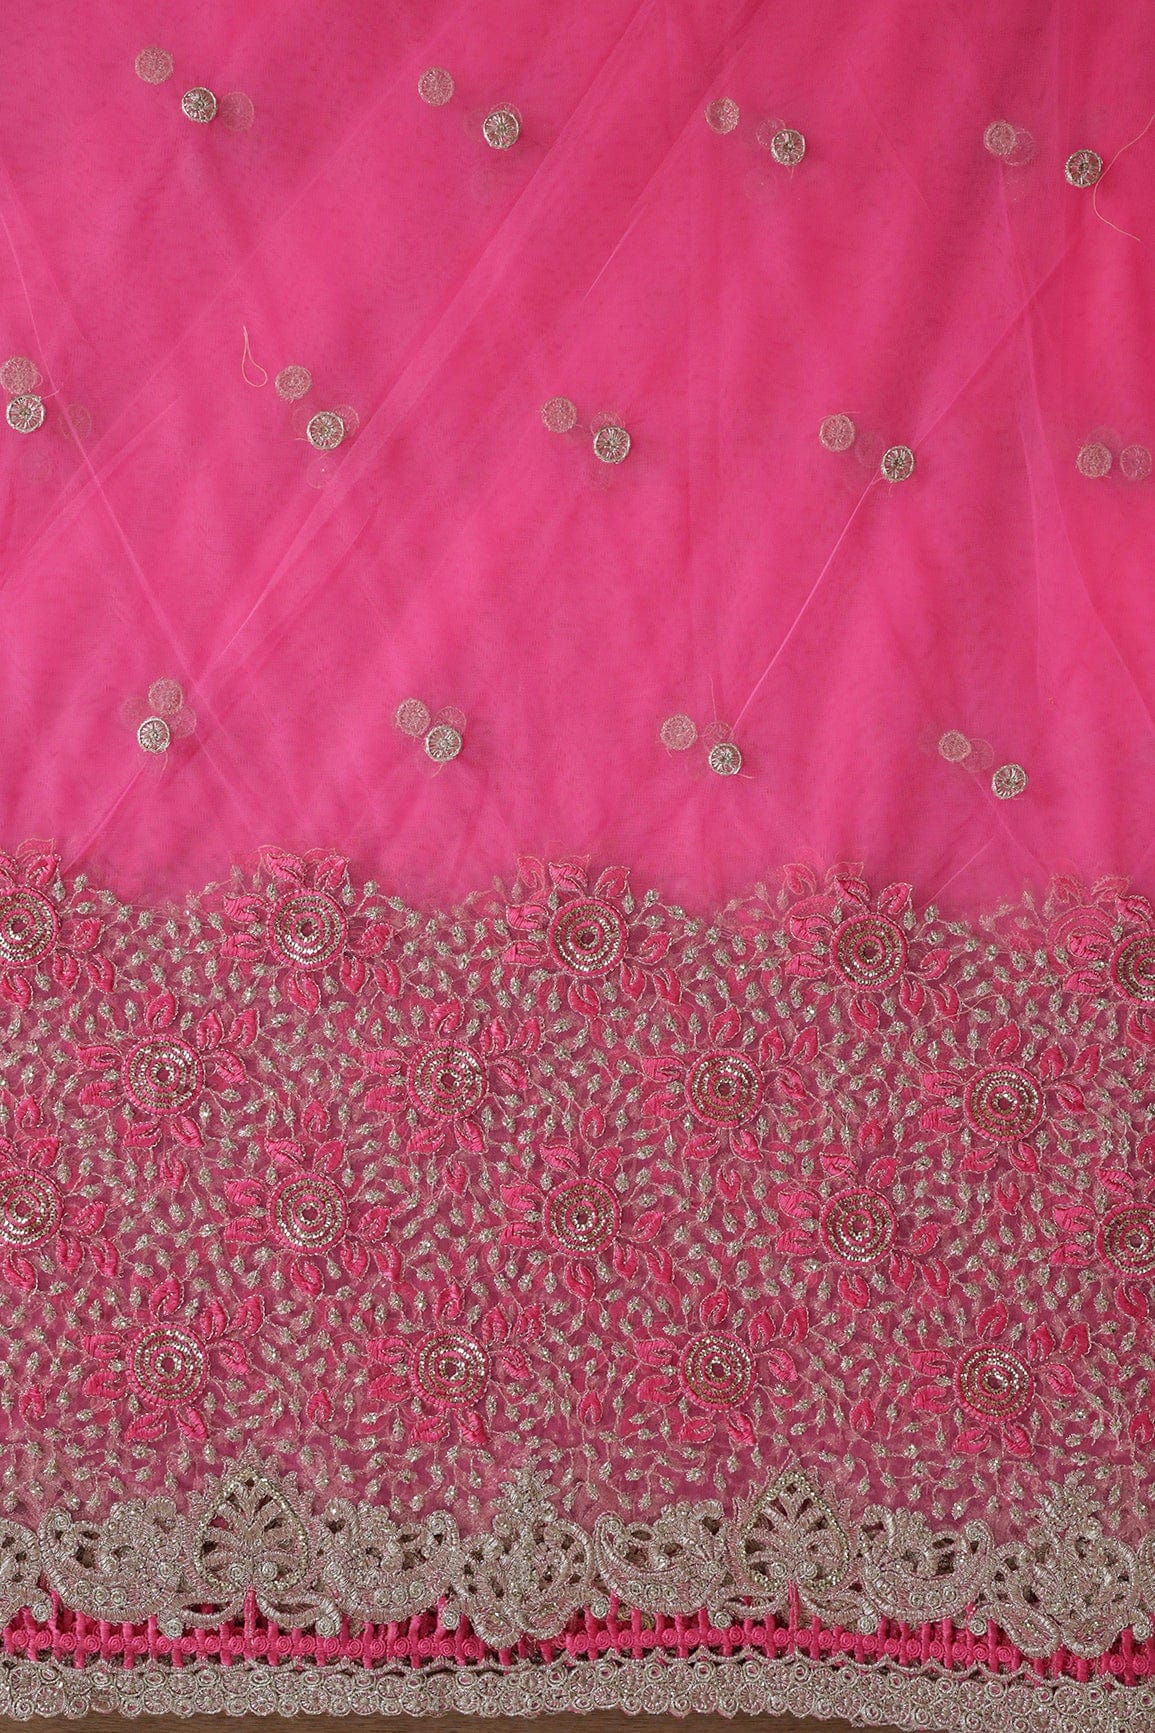 doeraa Embroidery Fabrics Big Width''56'' Pink Thread With Zari Floral Embroidery Work On Pink Soft Net Fabric With Border